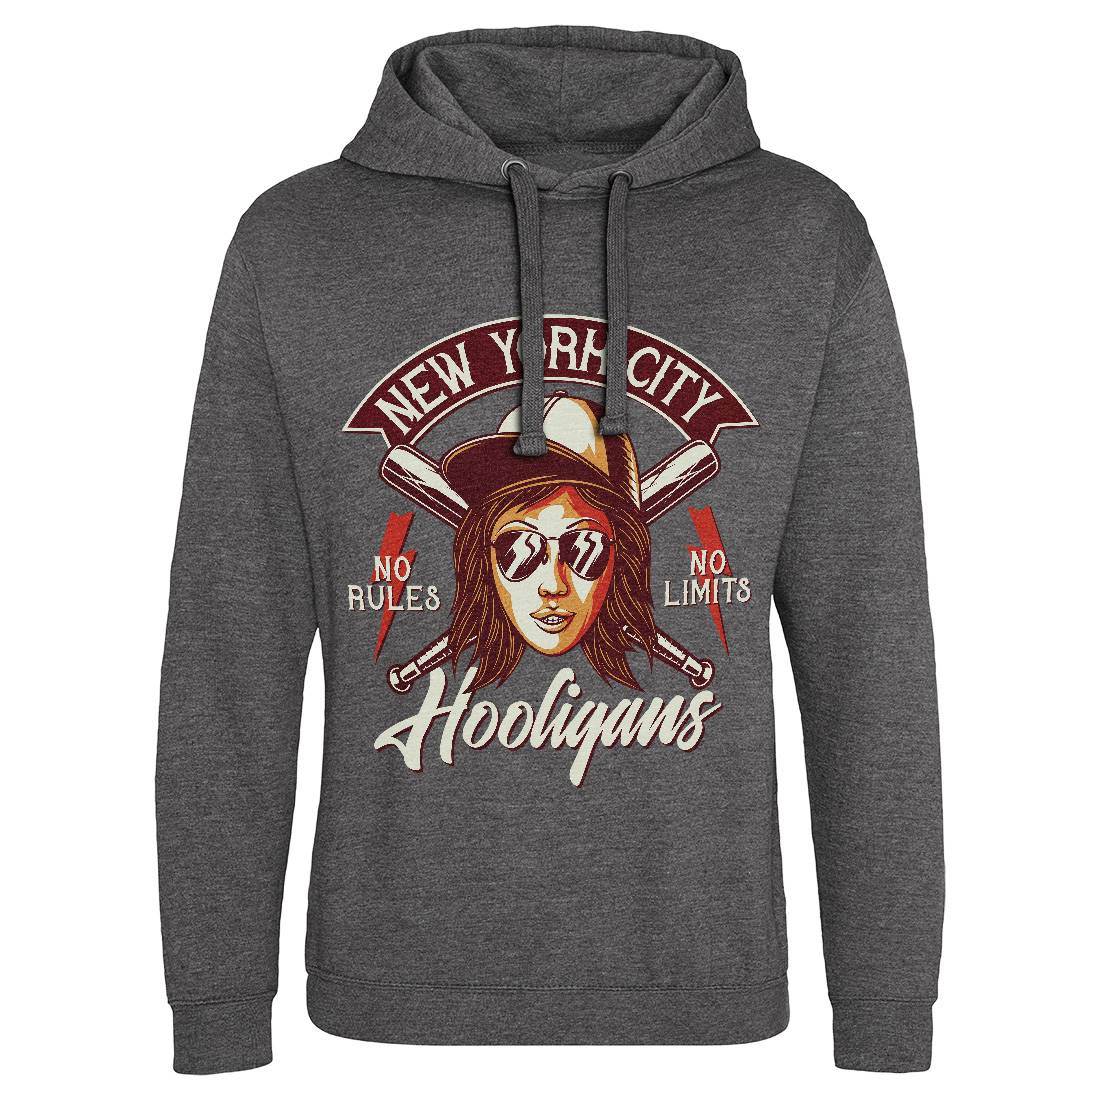 Hooligans New York Mens Hoodie Without Pocket Retro D947